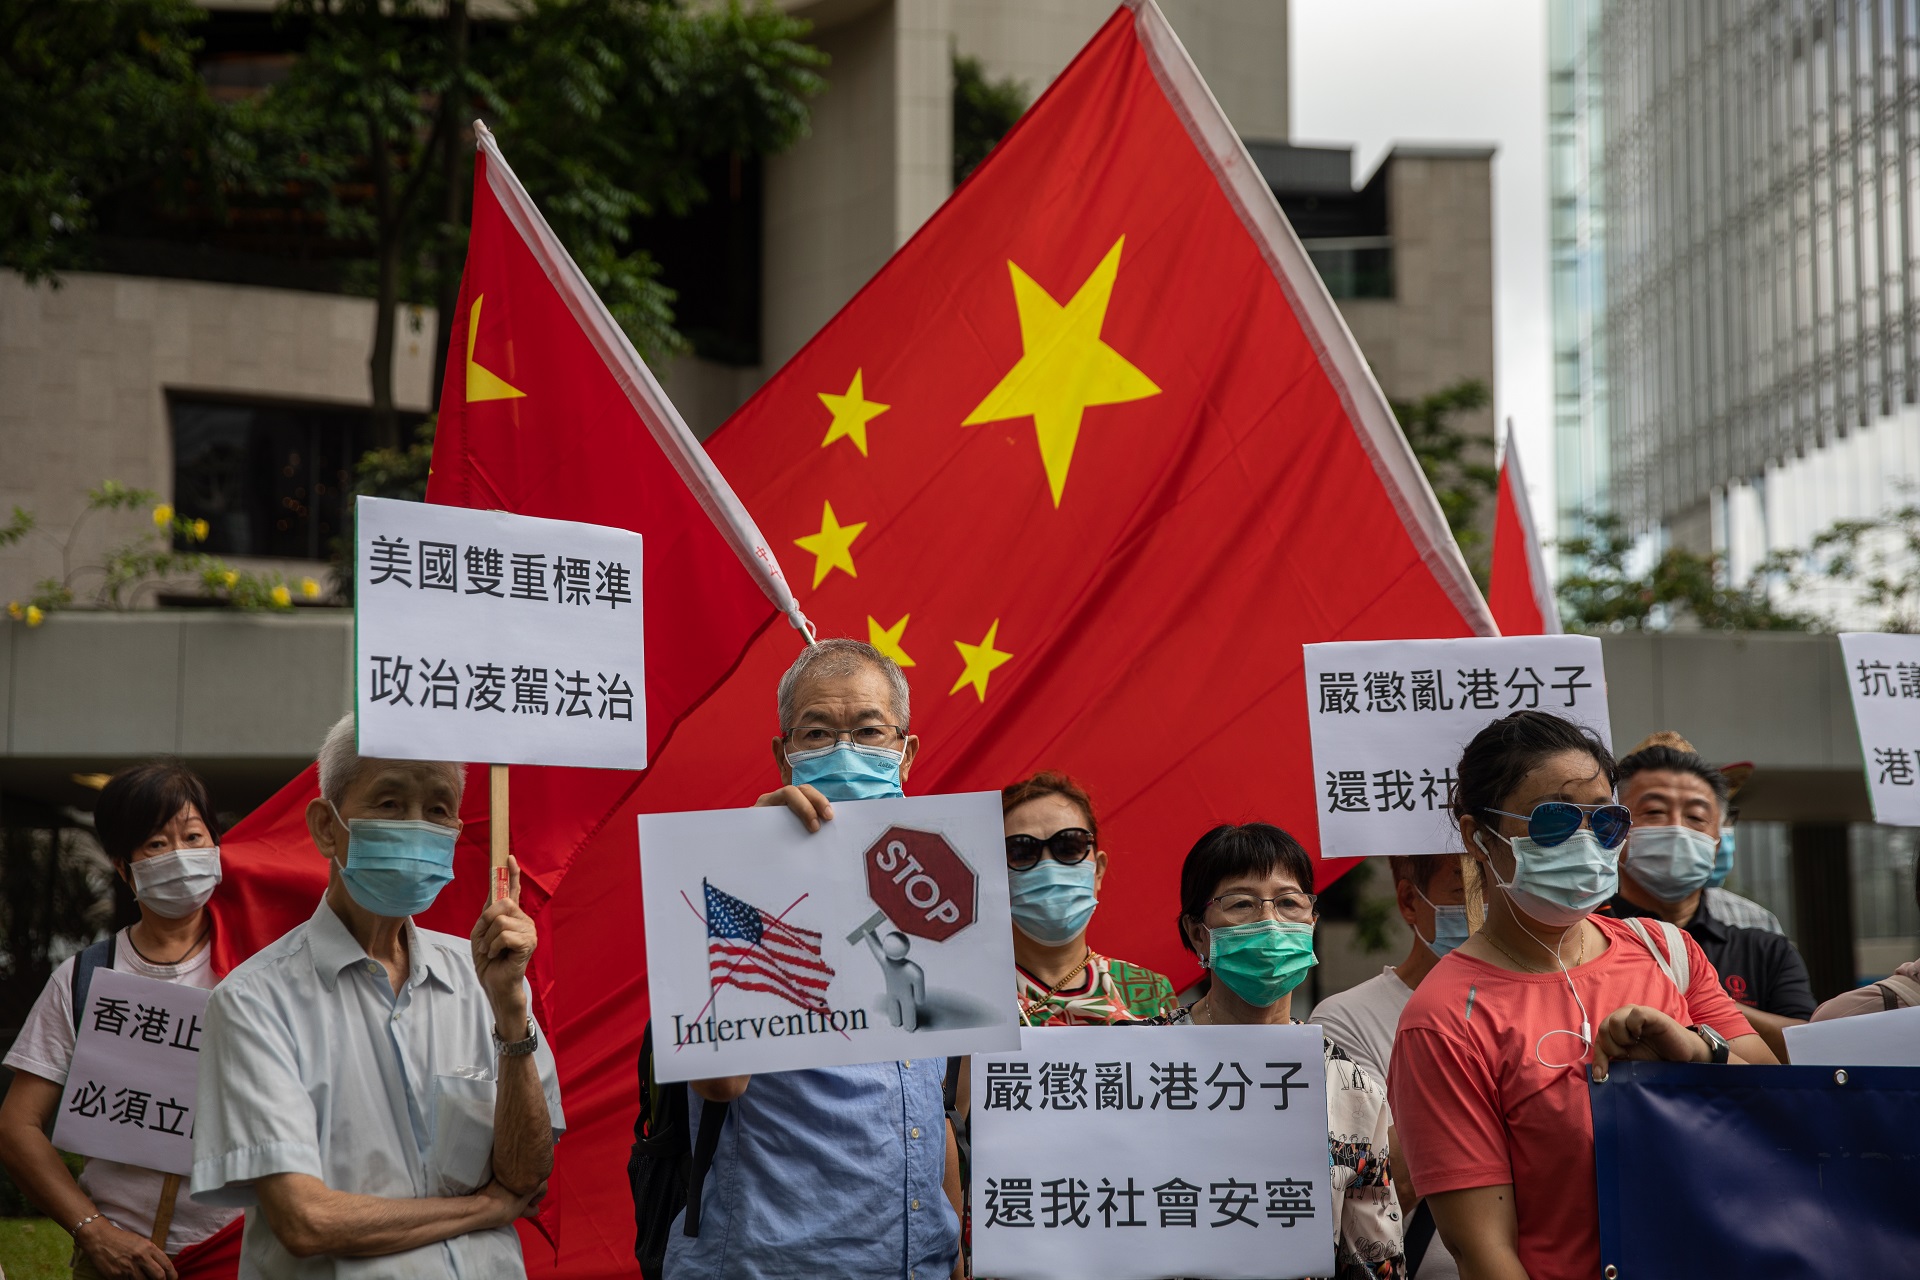 epa08509939 A group of pro-China activists hold banners and Chinese national flags during a march to the US Consulate General in Hong Kong, China, 26 June 2020. Demonstrators were protesting against the US Senate backed legislation that would impose mandatory sanctions on individuals or companies that back efforts by China to restrict Hong Kong's autonomy, as the government in Beijing moves to implement a new security law for the city and to denounce the US' 'intervention' in China's national affairs.  EPA/JEROME FAVRE